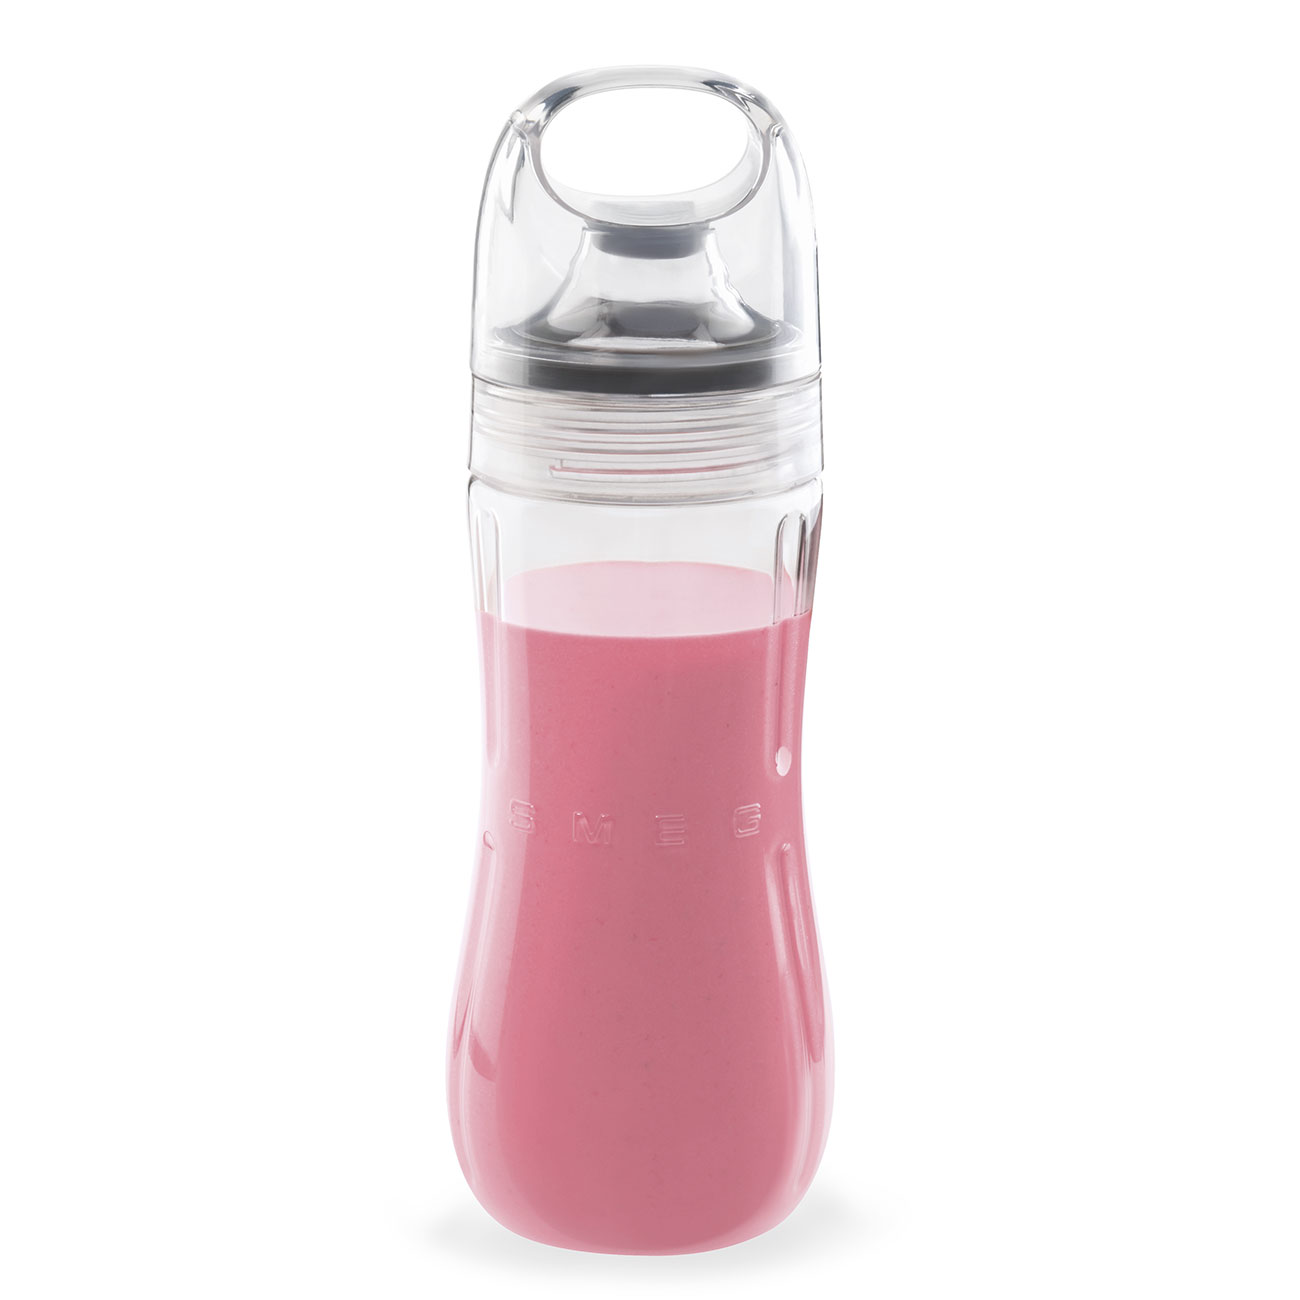 Bottle To Go with blades accessory for Smeg Blender - BGF03_2